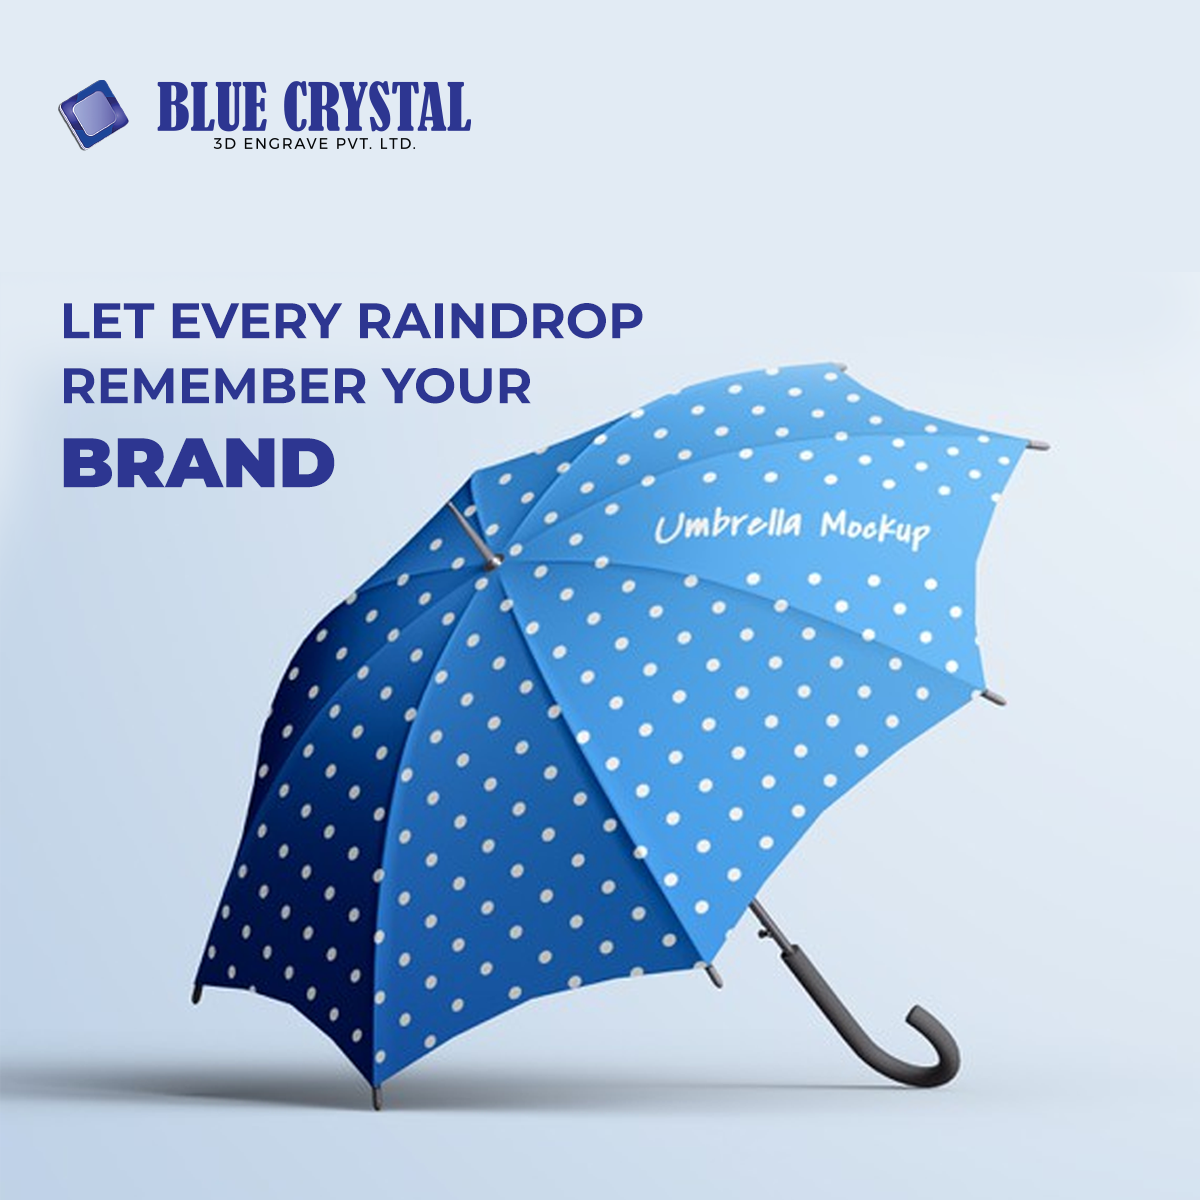 Blue Crystal 3D Engrave Pvt. Ltd Corporate Gifts Manufacturers